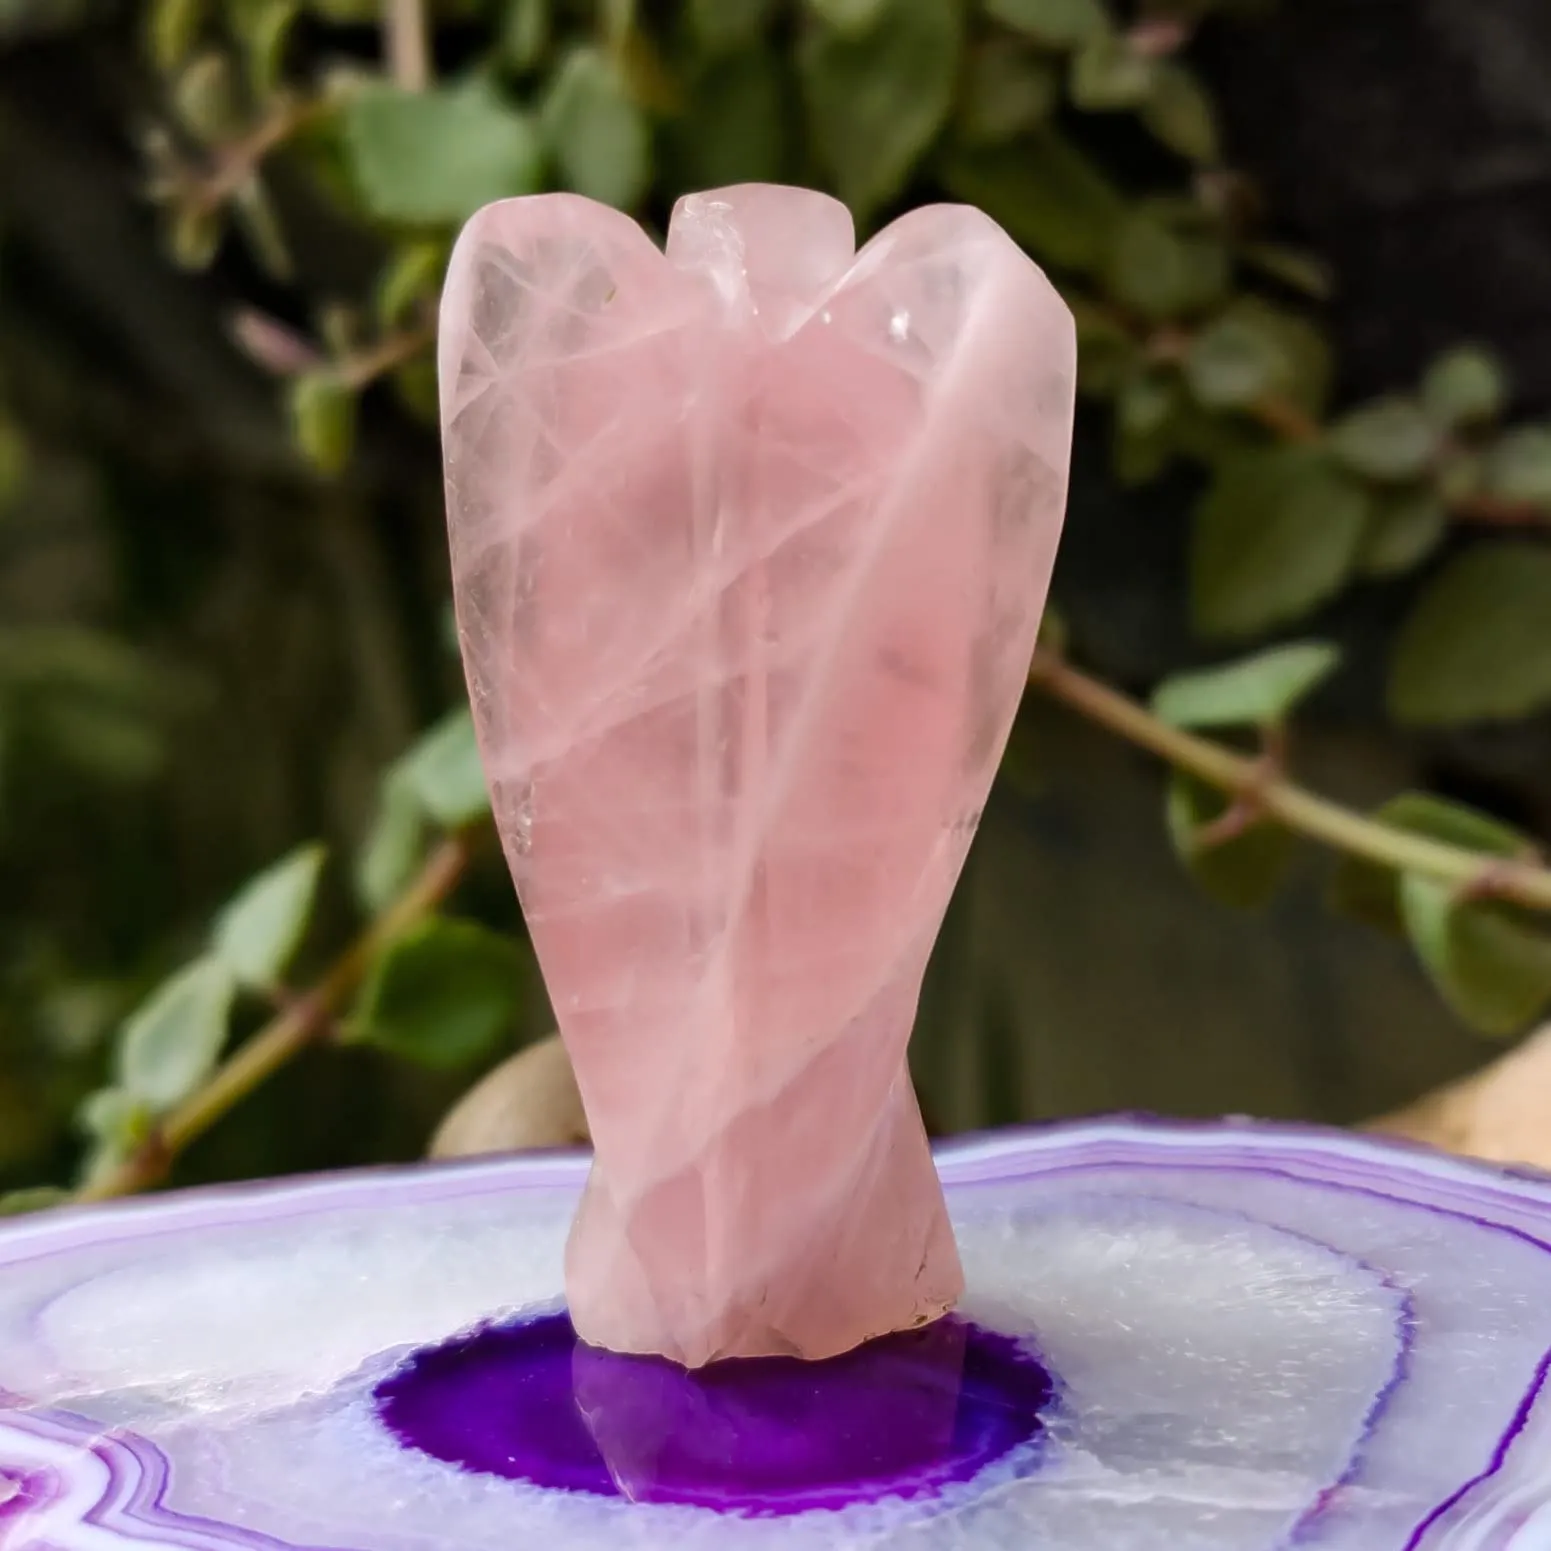 rose angel wings crystal handcarved pocket stone for good luck spiritual reiki healing worry angel figurine peace angel statue decor gift christmas blessing gift1 52 inches